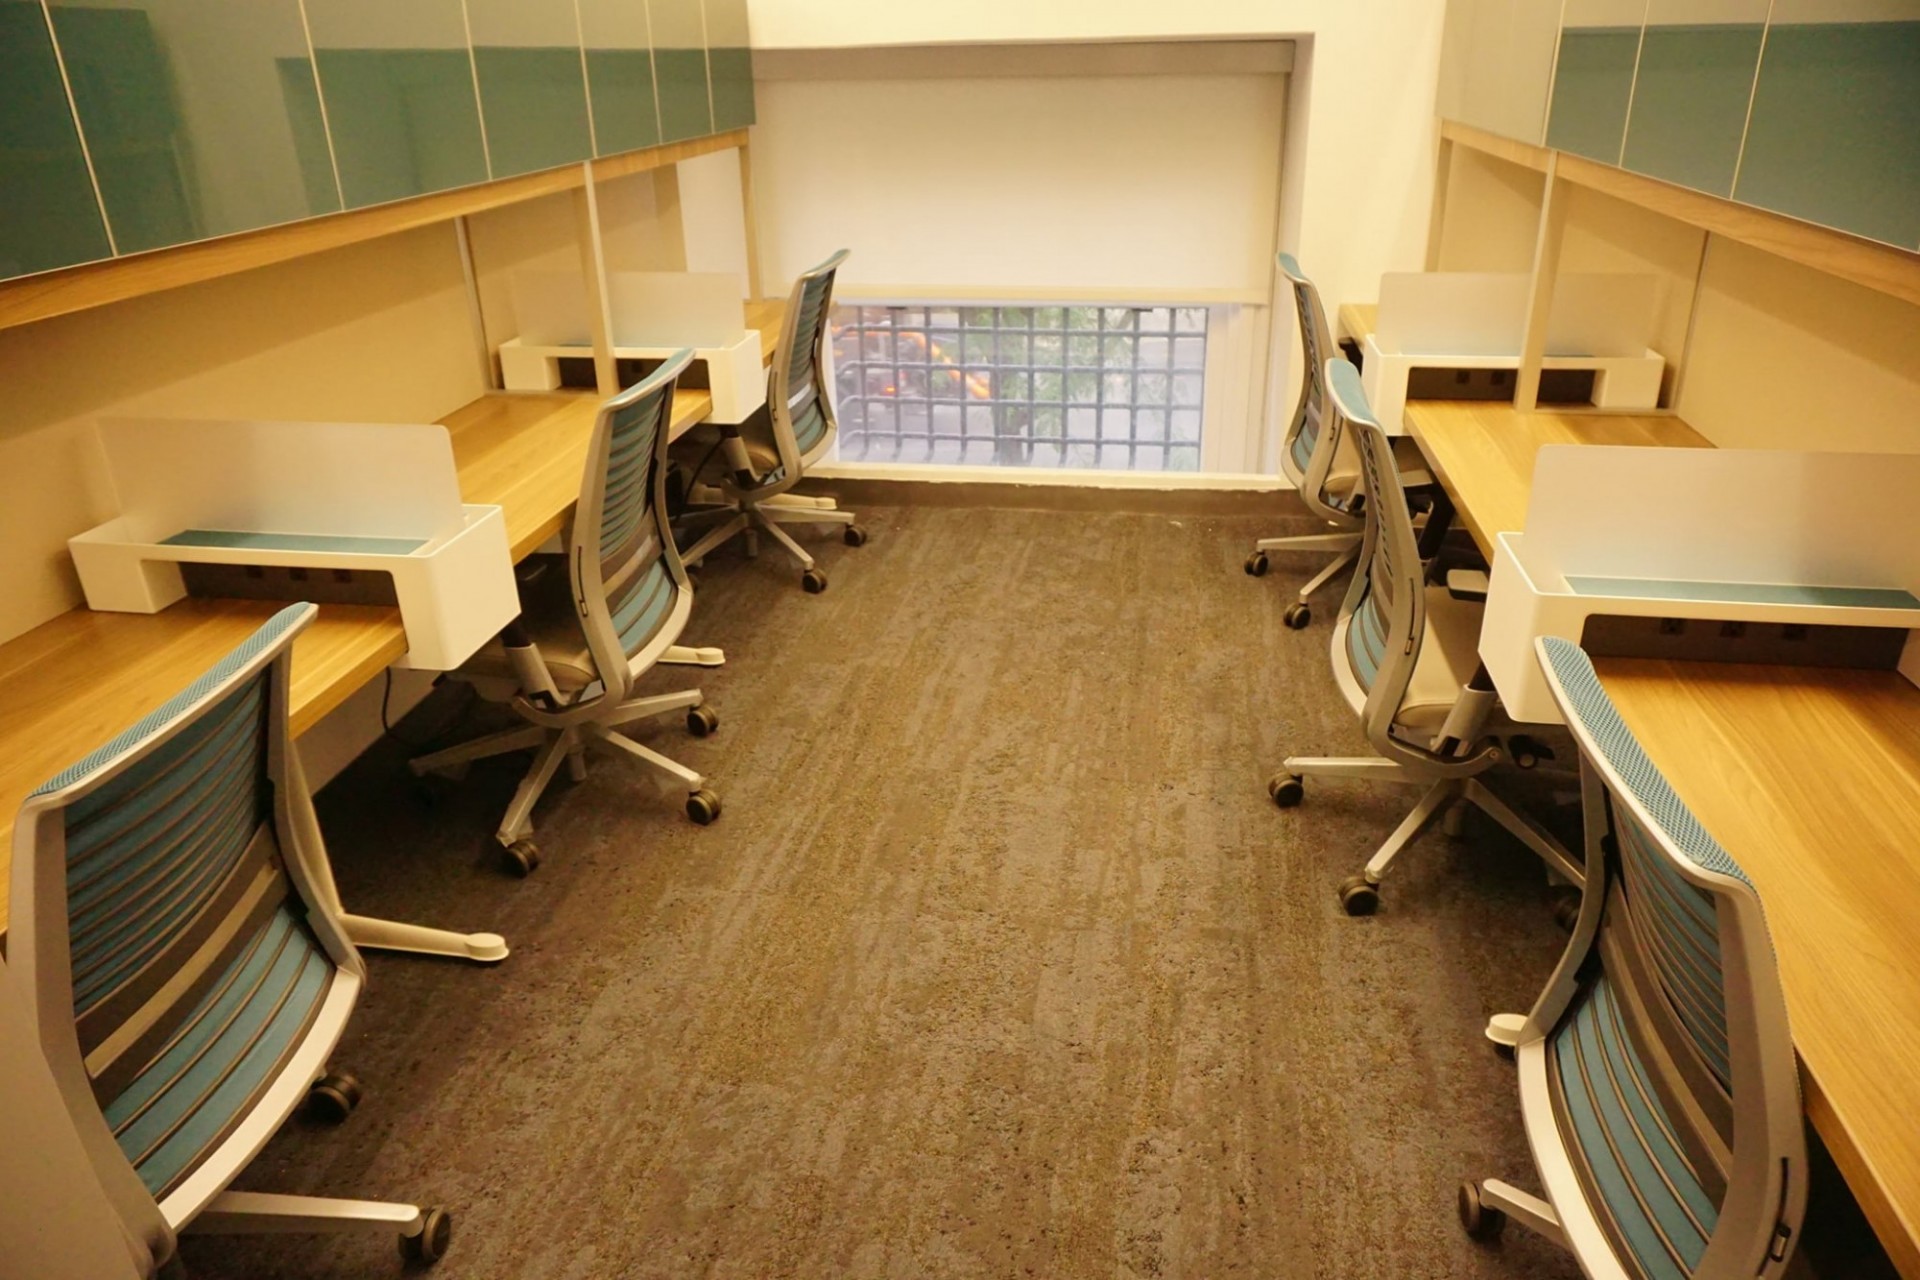 There are six workstations, three on either side of the room. Each station is divided by a frosted glass partition and has a light blue office chair.